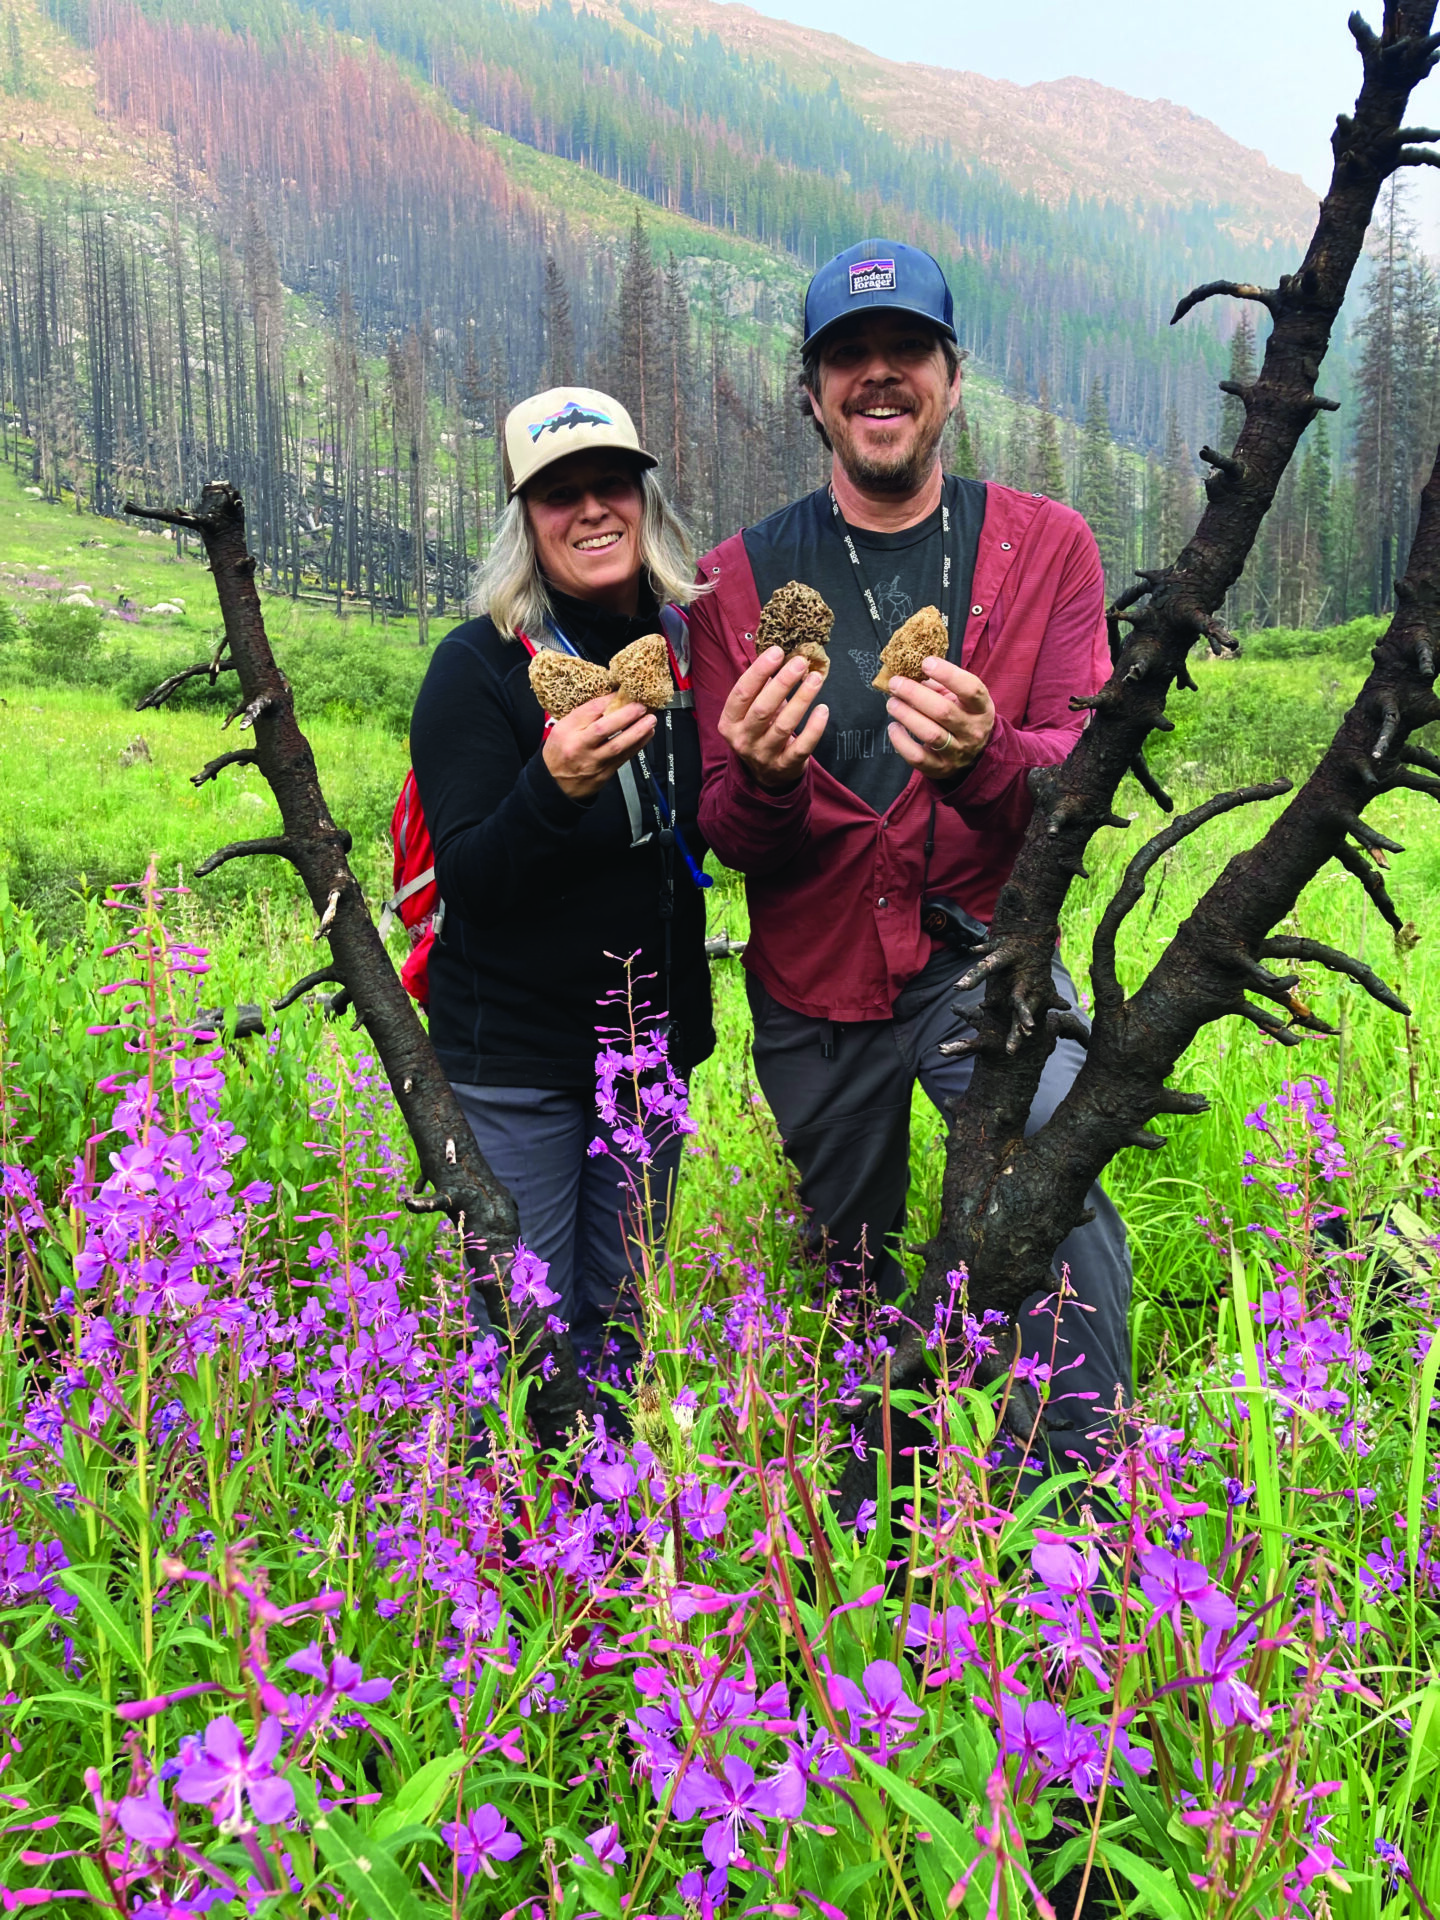 KRISTEN AND TRENT BIZZARD holding morels found in a local burn (Morchella species), they refer tothem as "burn morels."